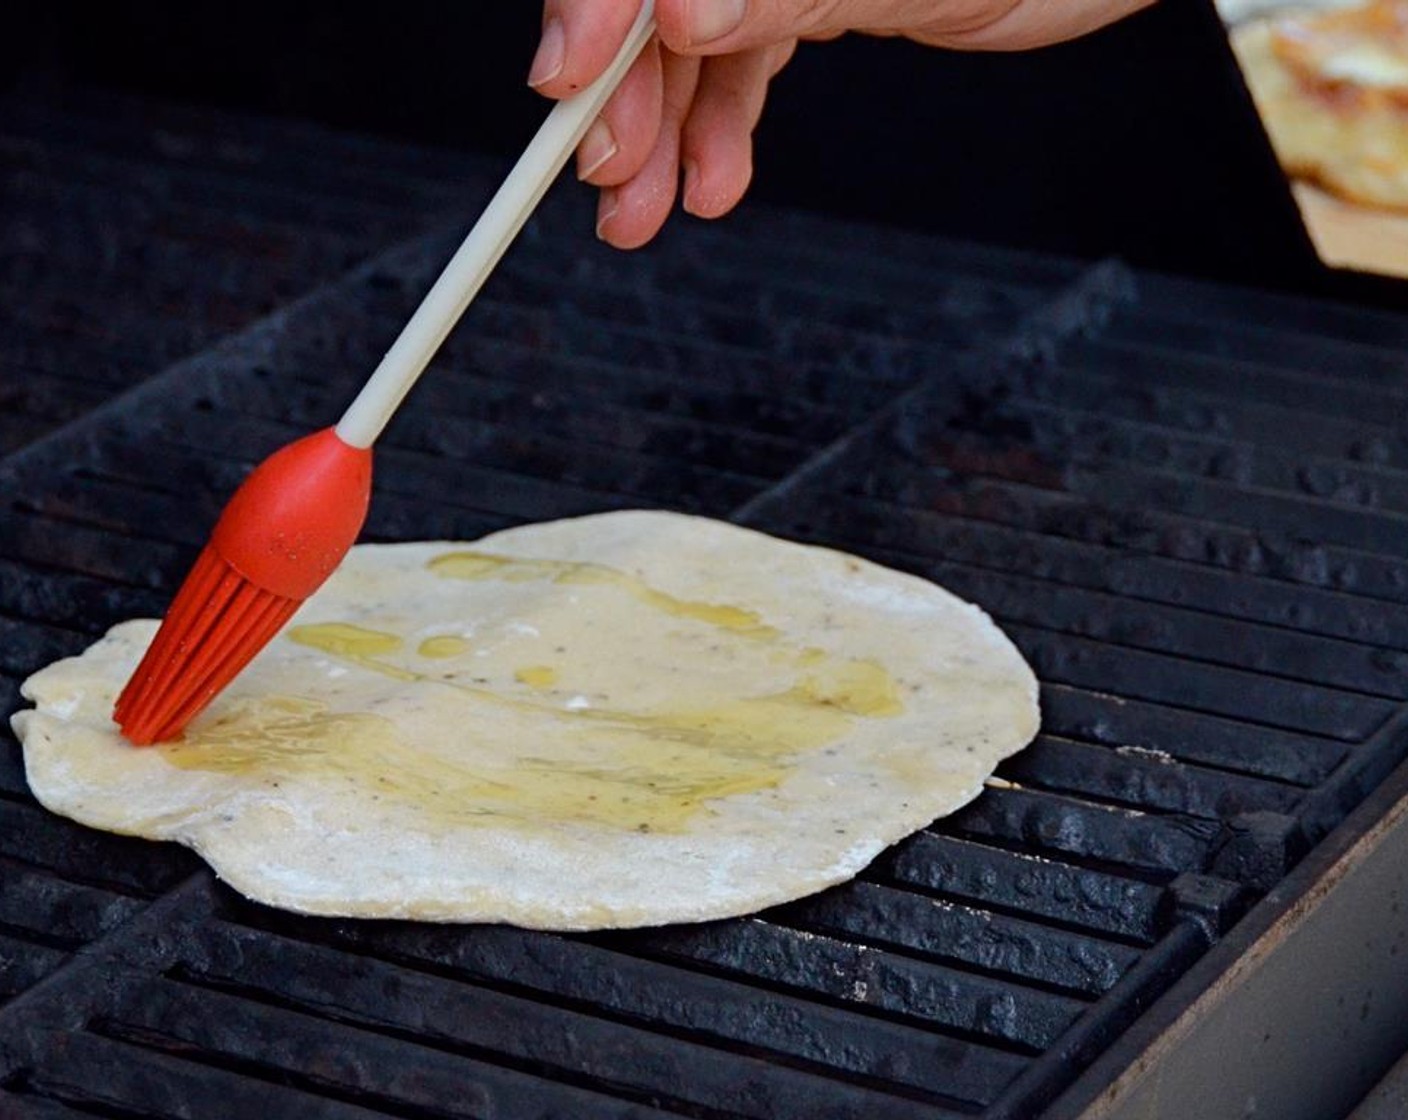 step 16 Place a pizza dough on the grill. Sprinkle with 1 teaspoon of olive oil and quickly brush the oil over the dough with a pastry brush.